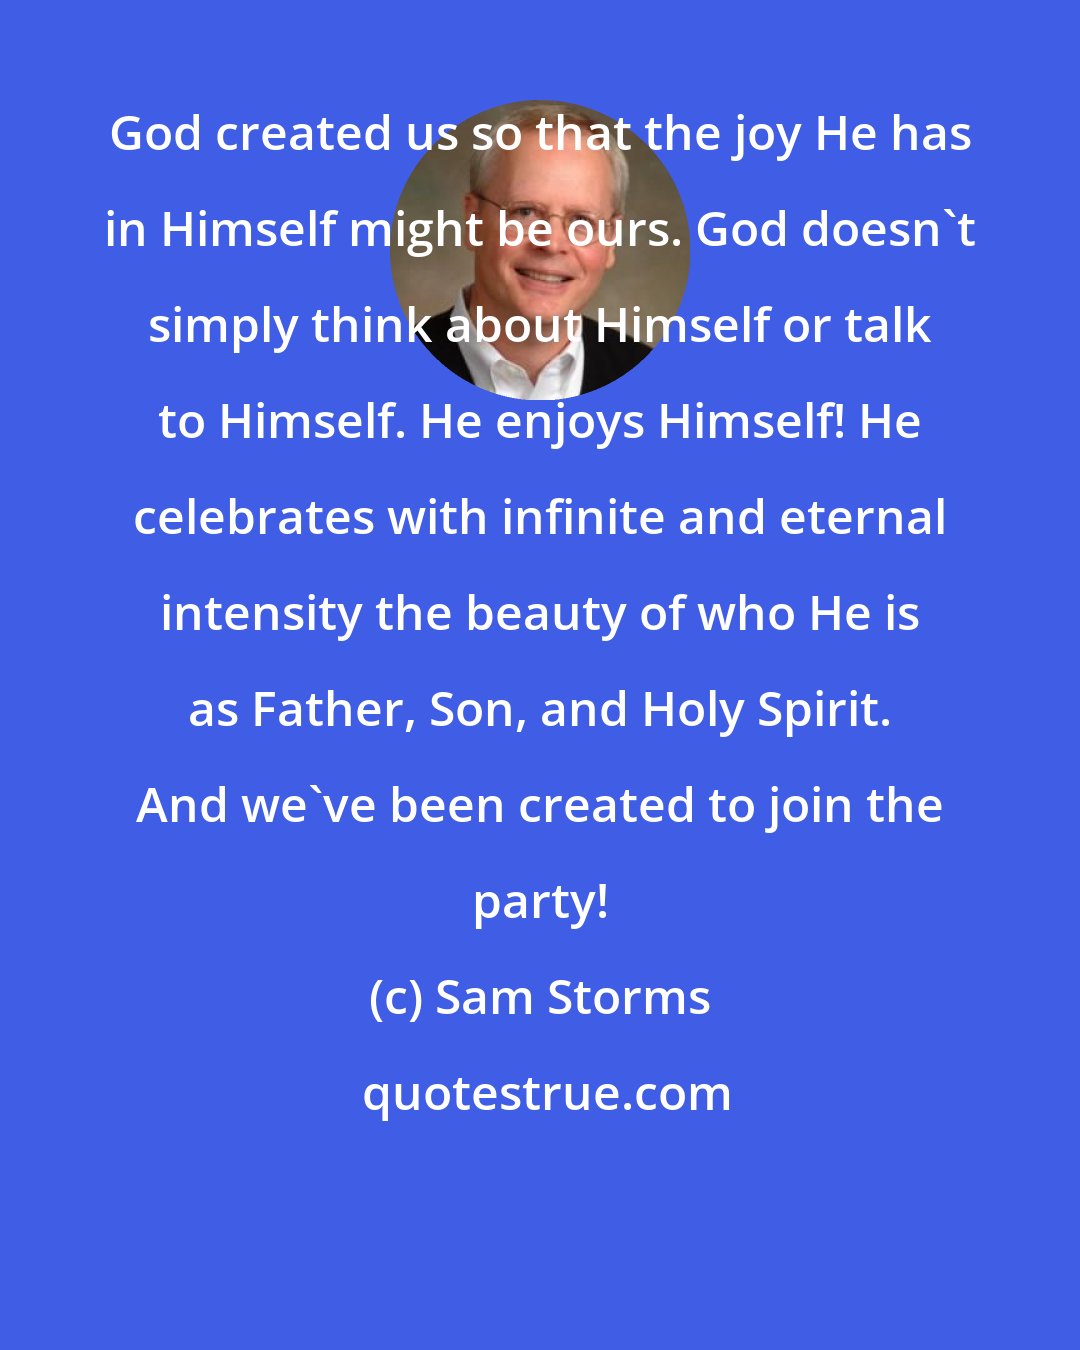 Sam Storms: God created us so that the joy He has in Himself might be ours. God doesn't simply think about Himself or talk to Himself. He enjoys Himself! He celebrates with infinite and eternal intensity the beauty of who He is as Father, Son, and Holy Spirit. And we've been created to join the party!